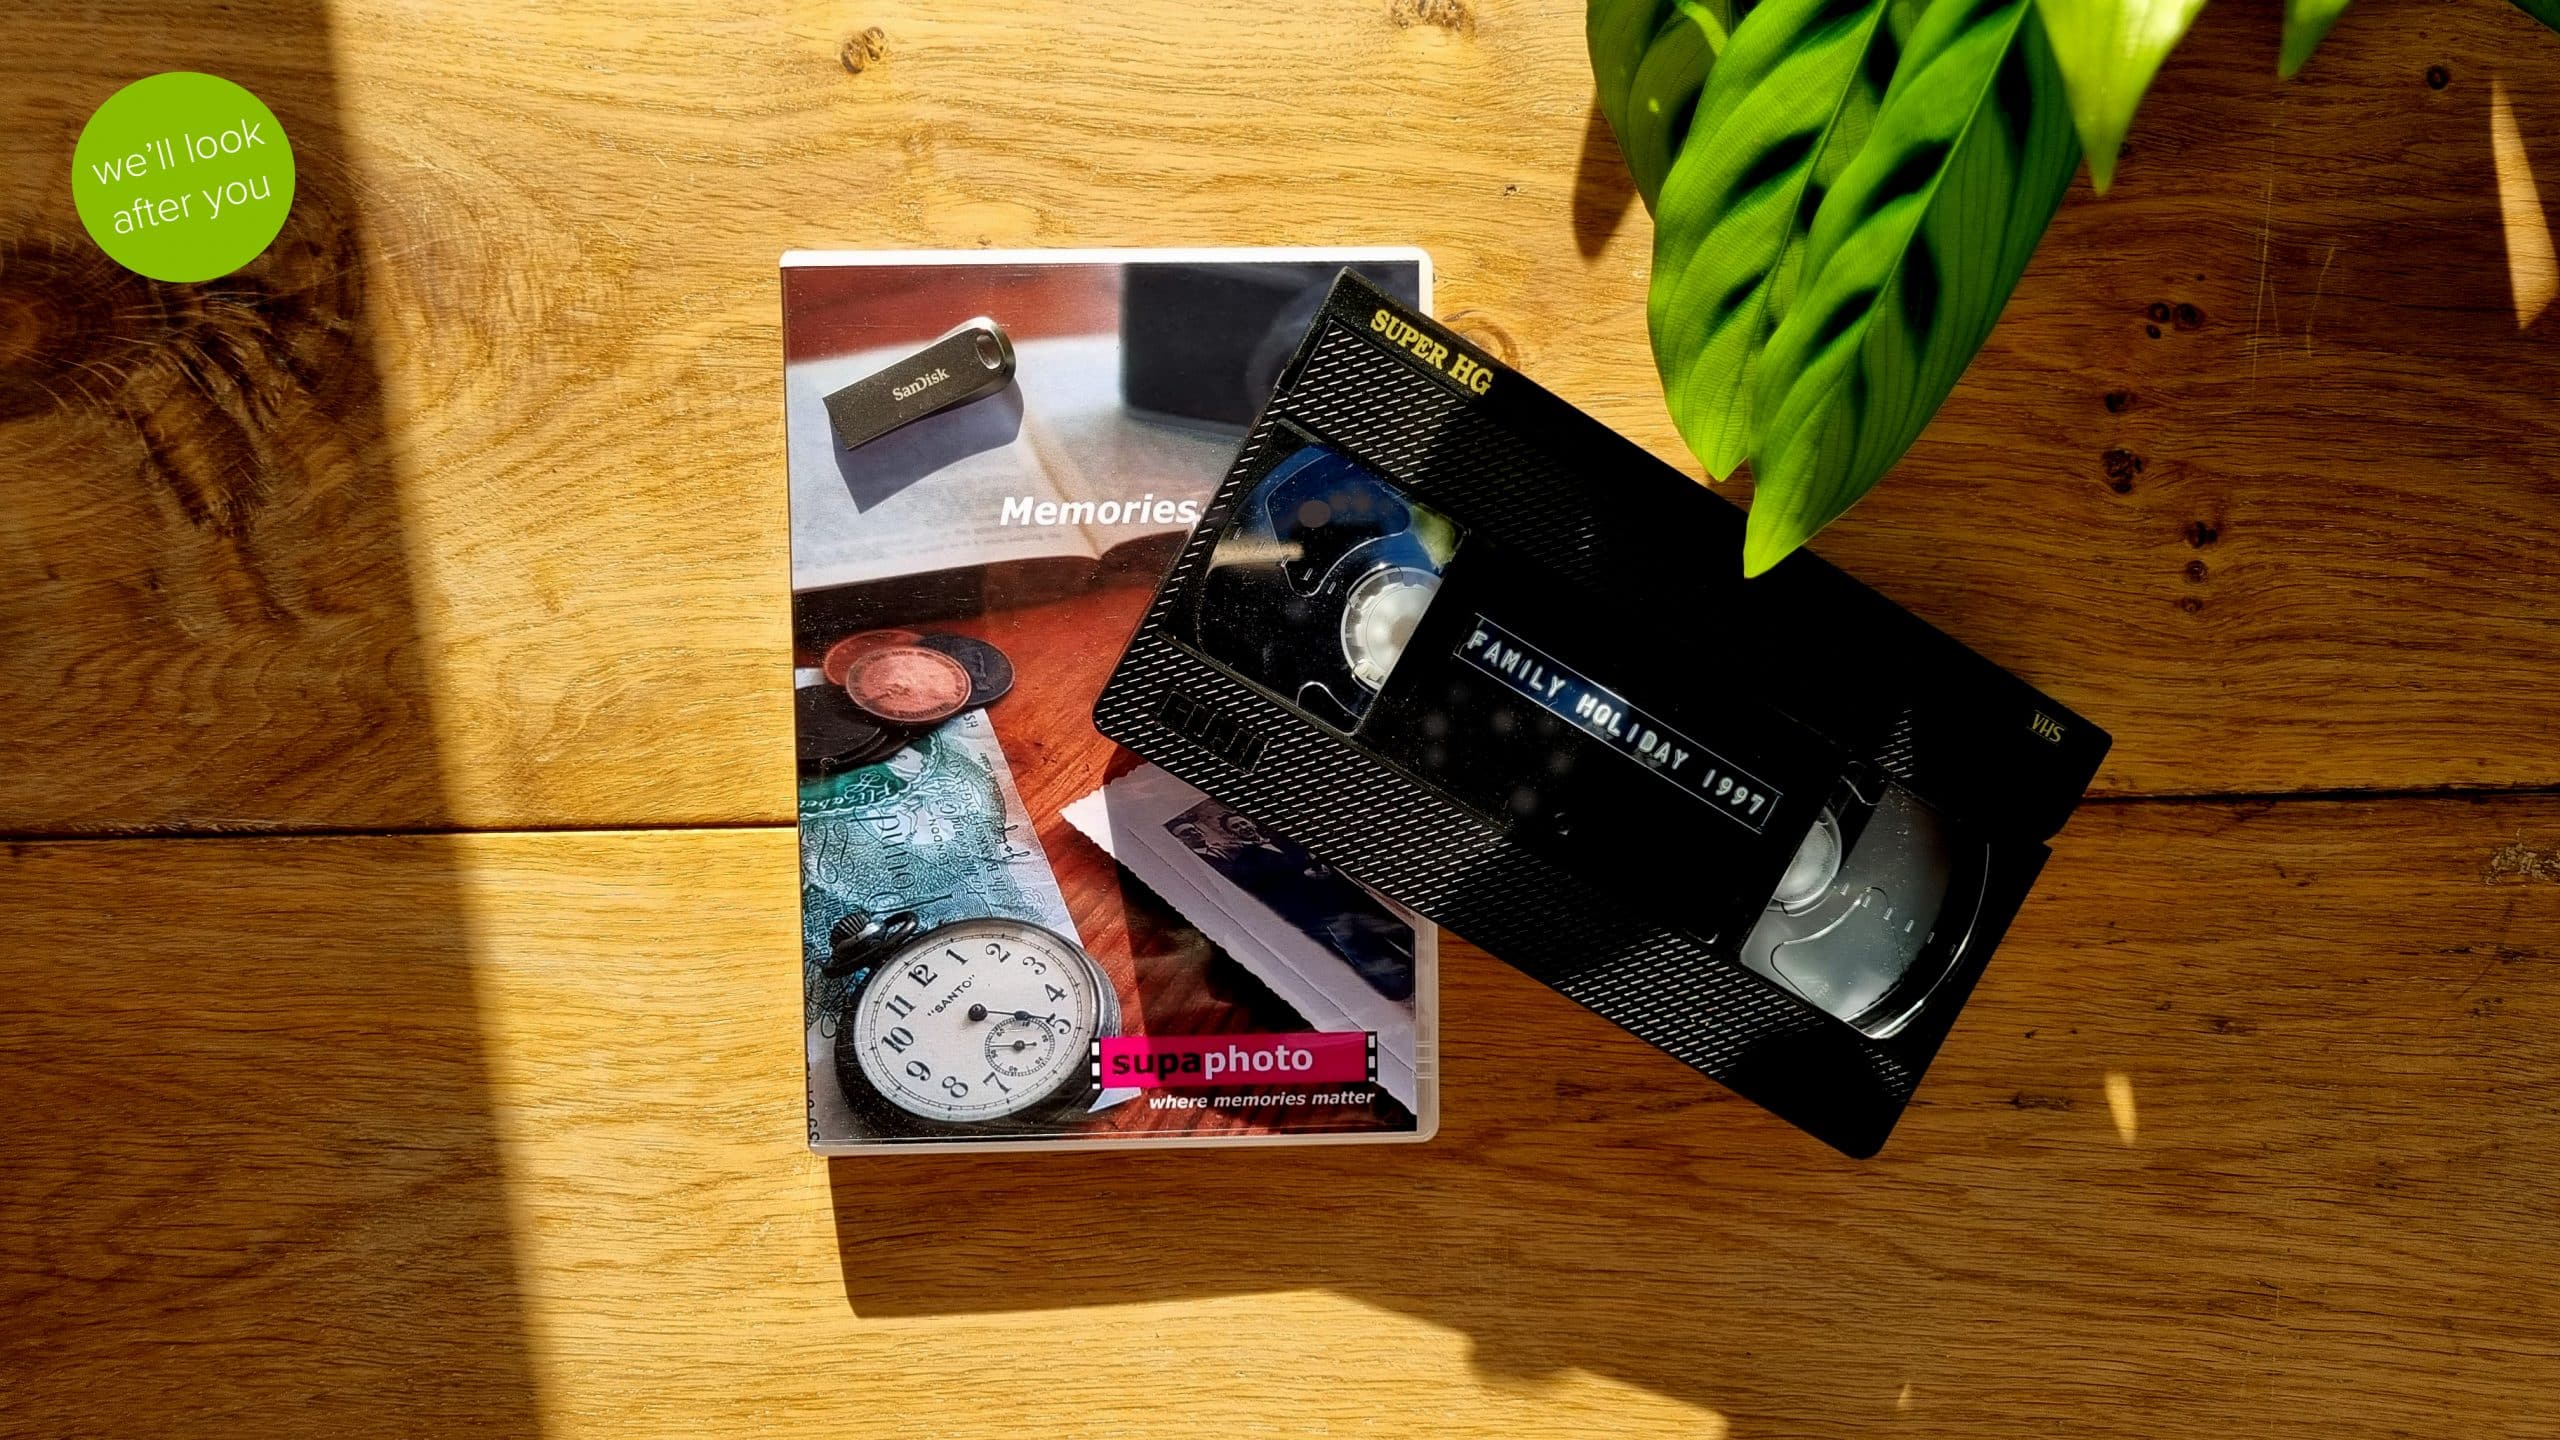 memory stick and vhs tape over a DVD case in front of a wooden background